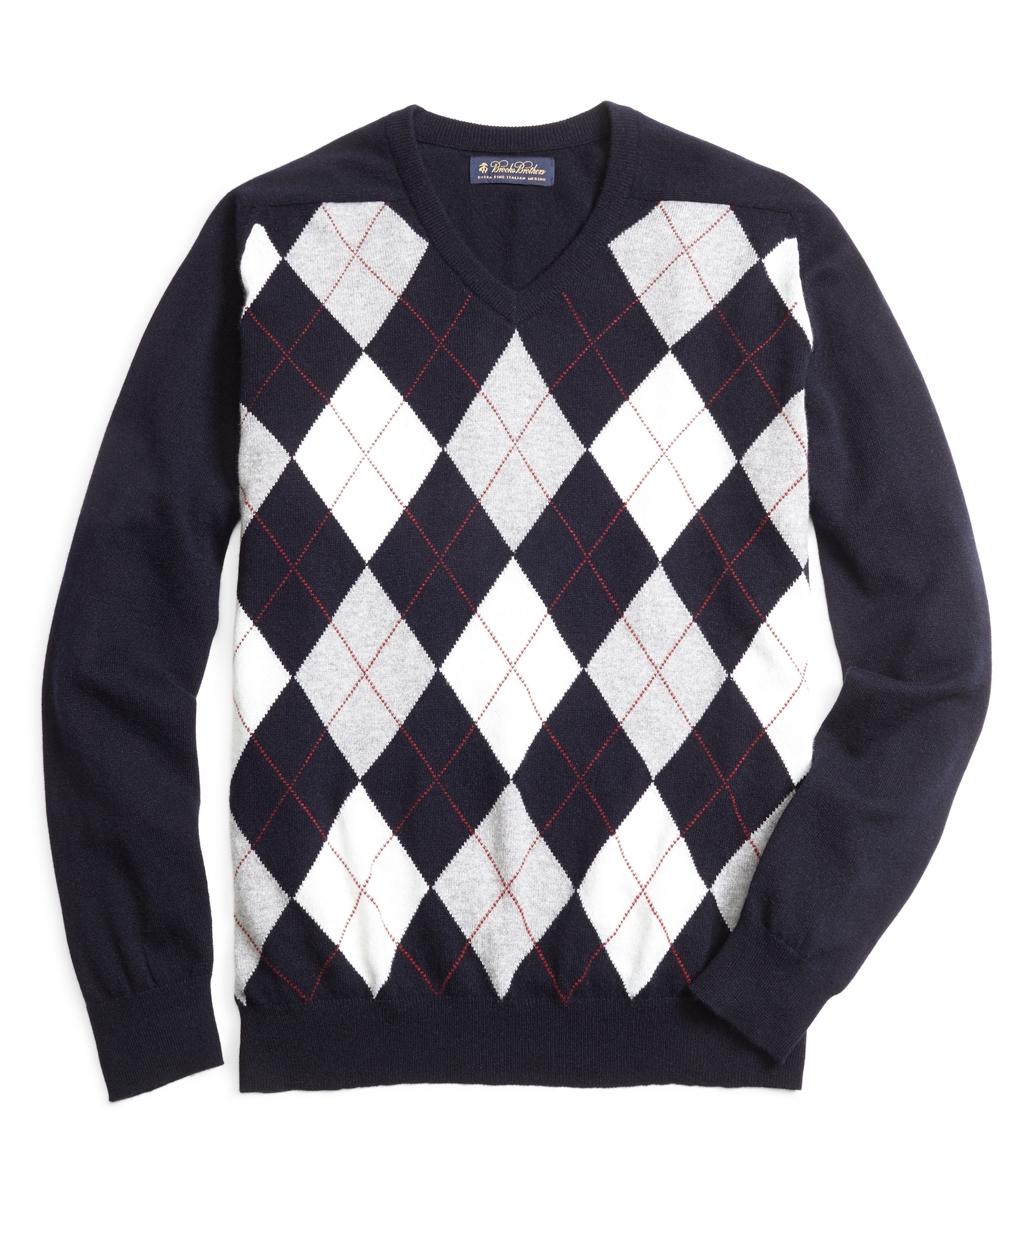 New mens jumpers England Style Men's clothing eden park